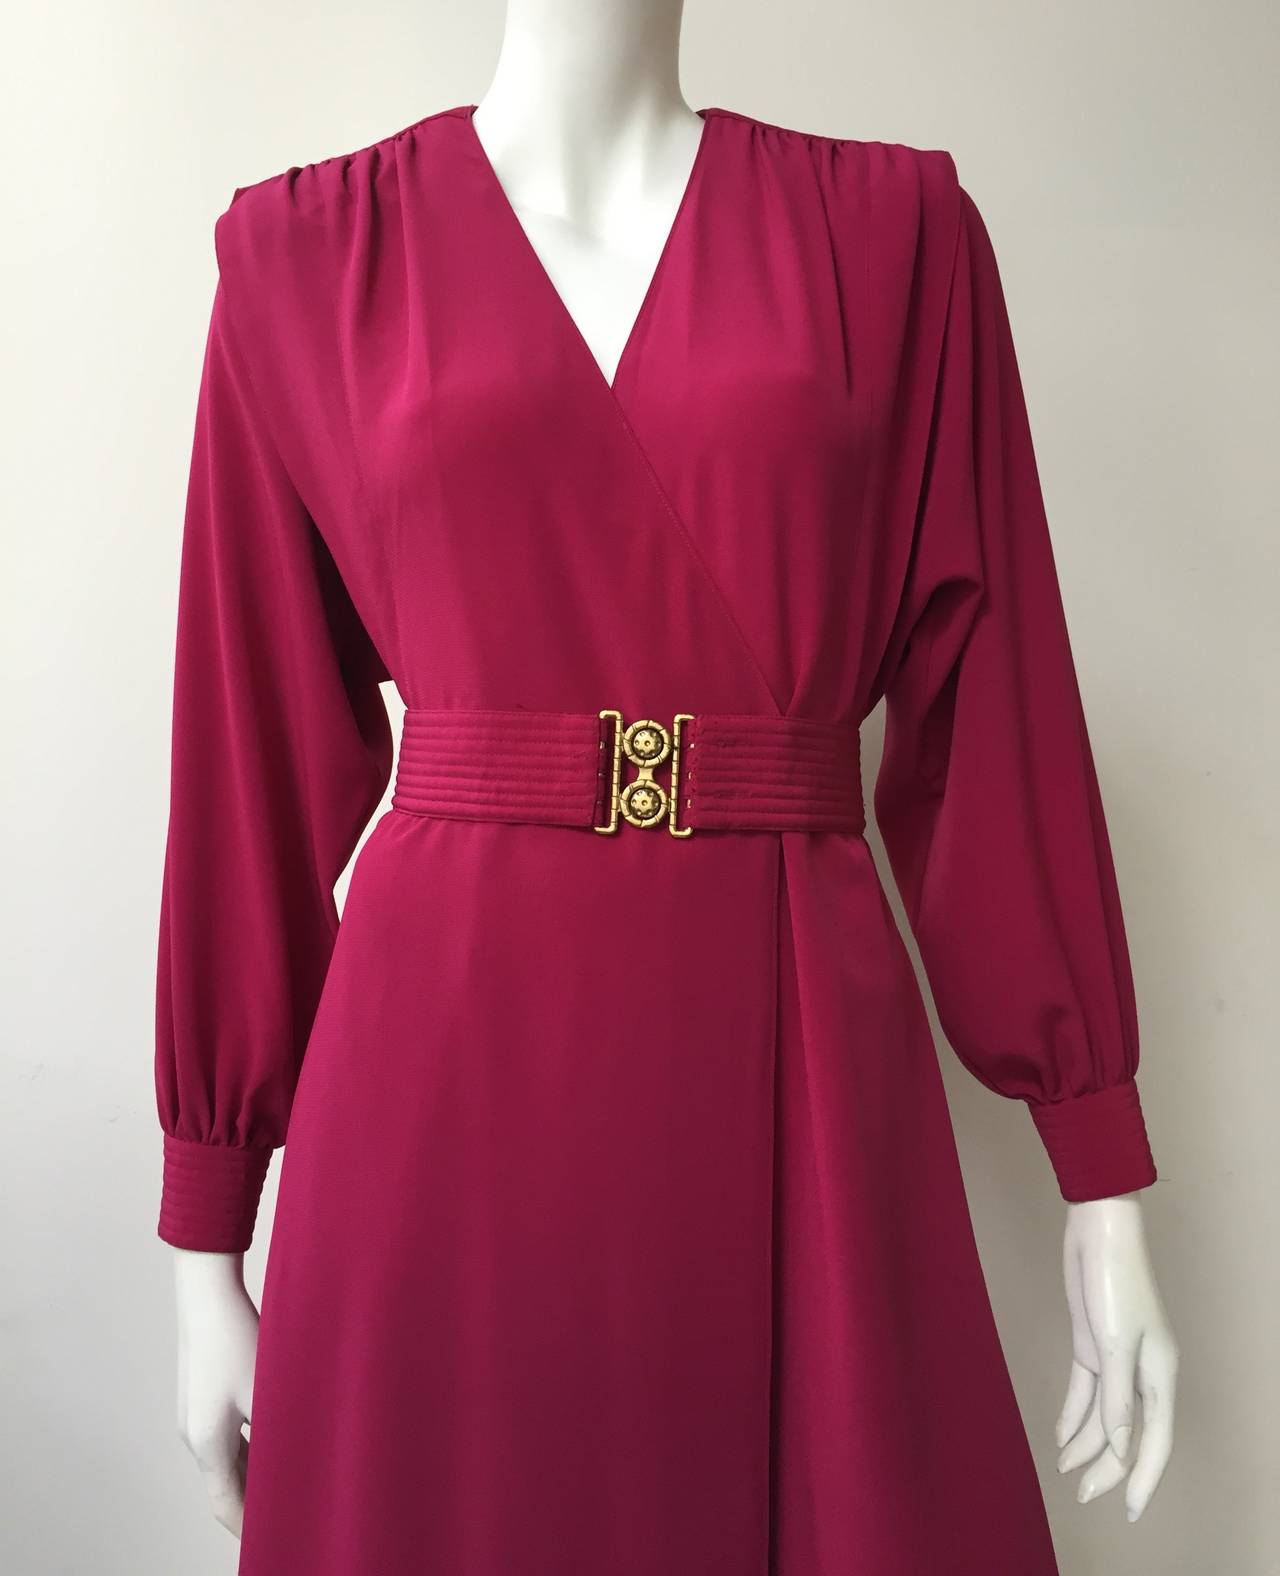 Pierre Cardin for Lillie Rubin 80s burgundy wrap dress with pockets & belt.
Original size tag shows size 4 but this is more size 6 due to how it fits the size 4 mannequin and measurements.
Back part of dress has elastic waistband giving a little